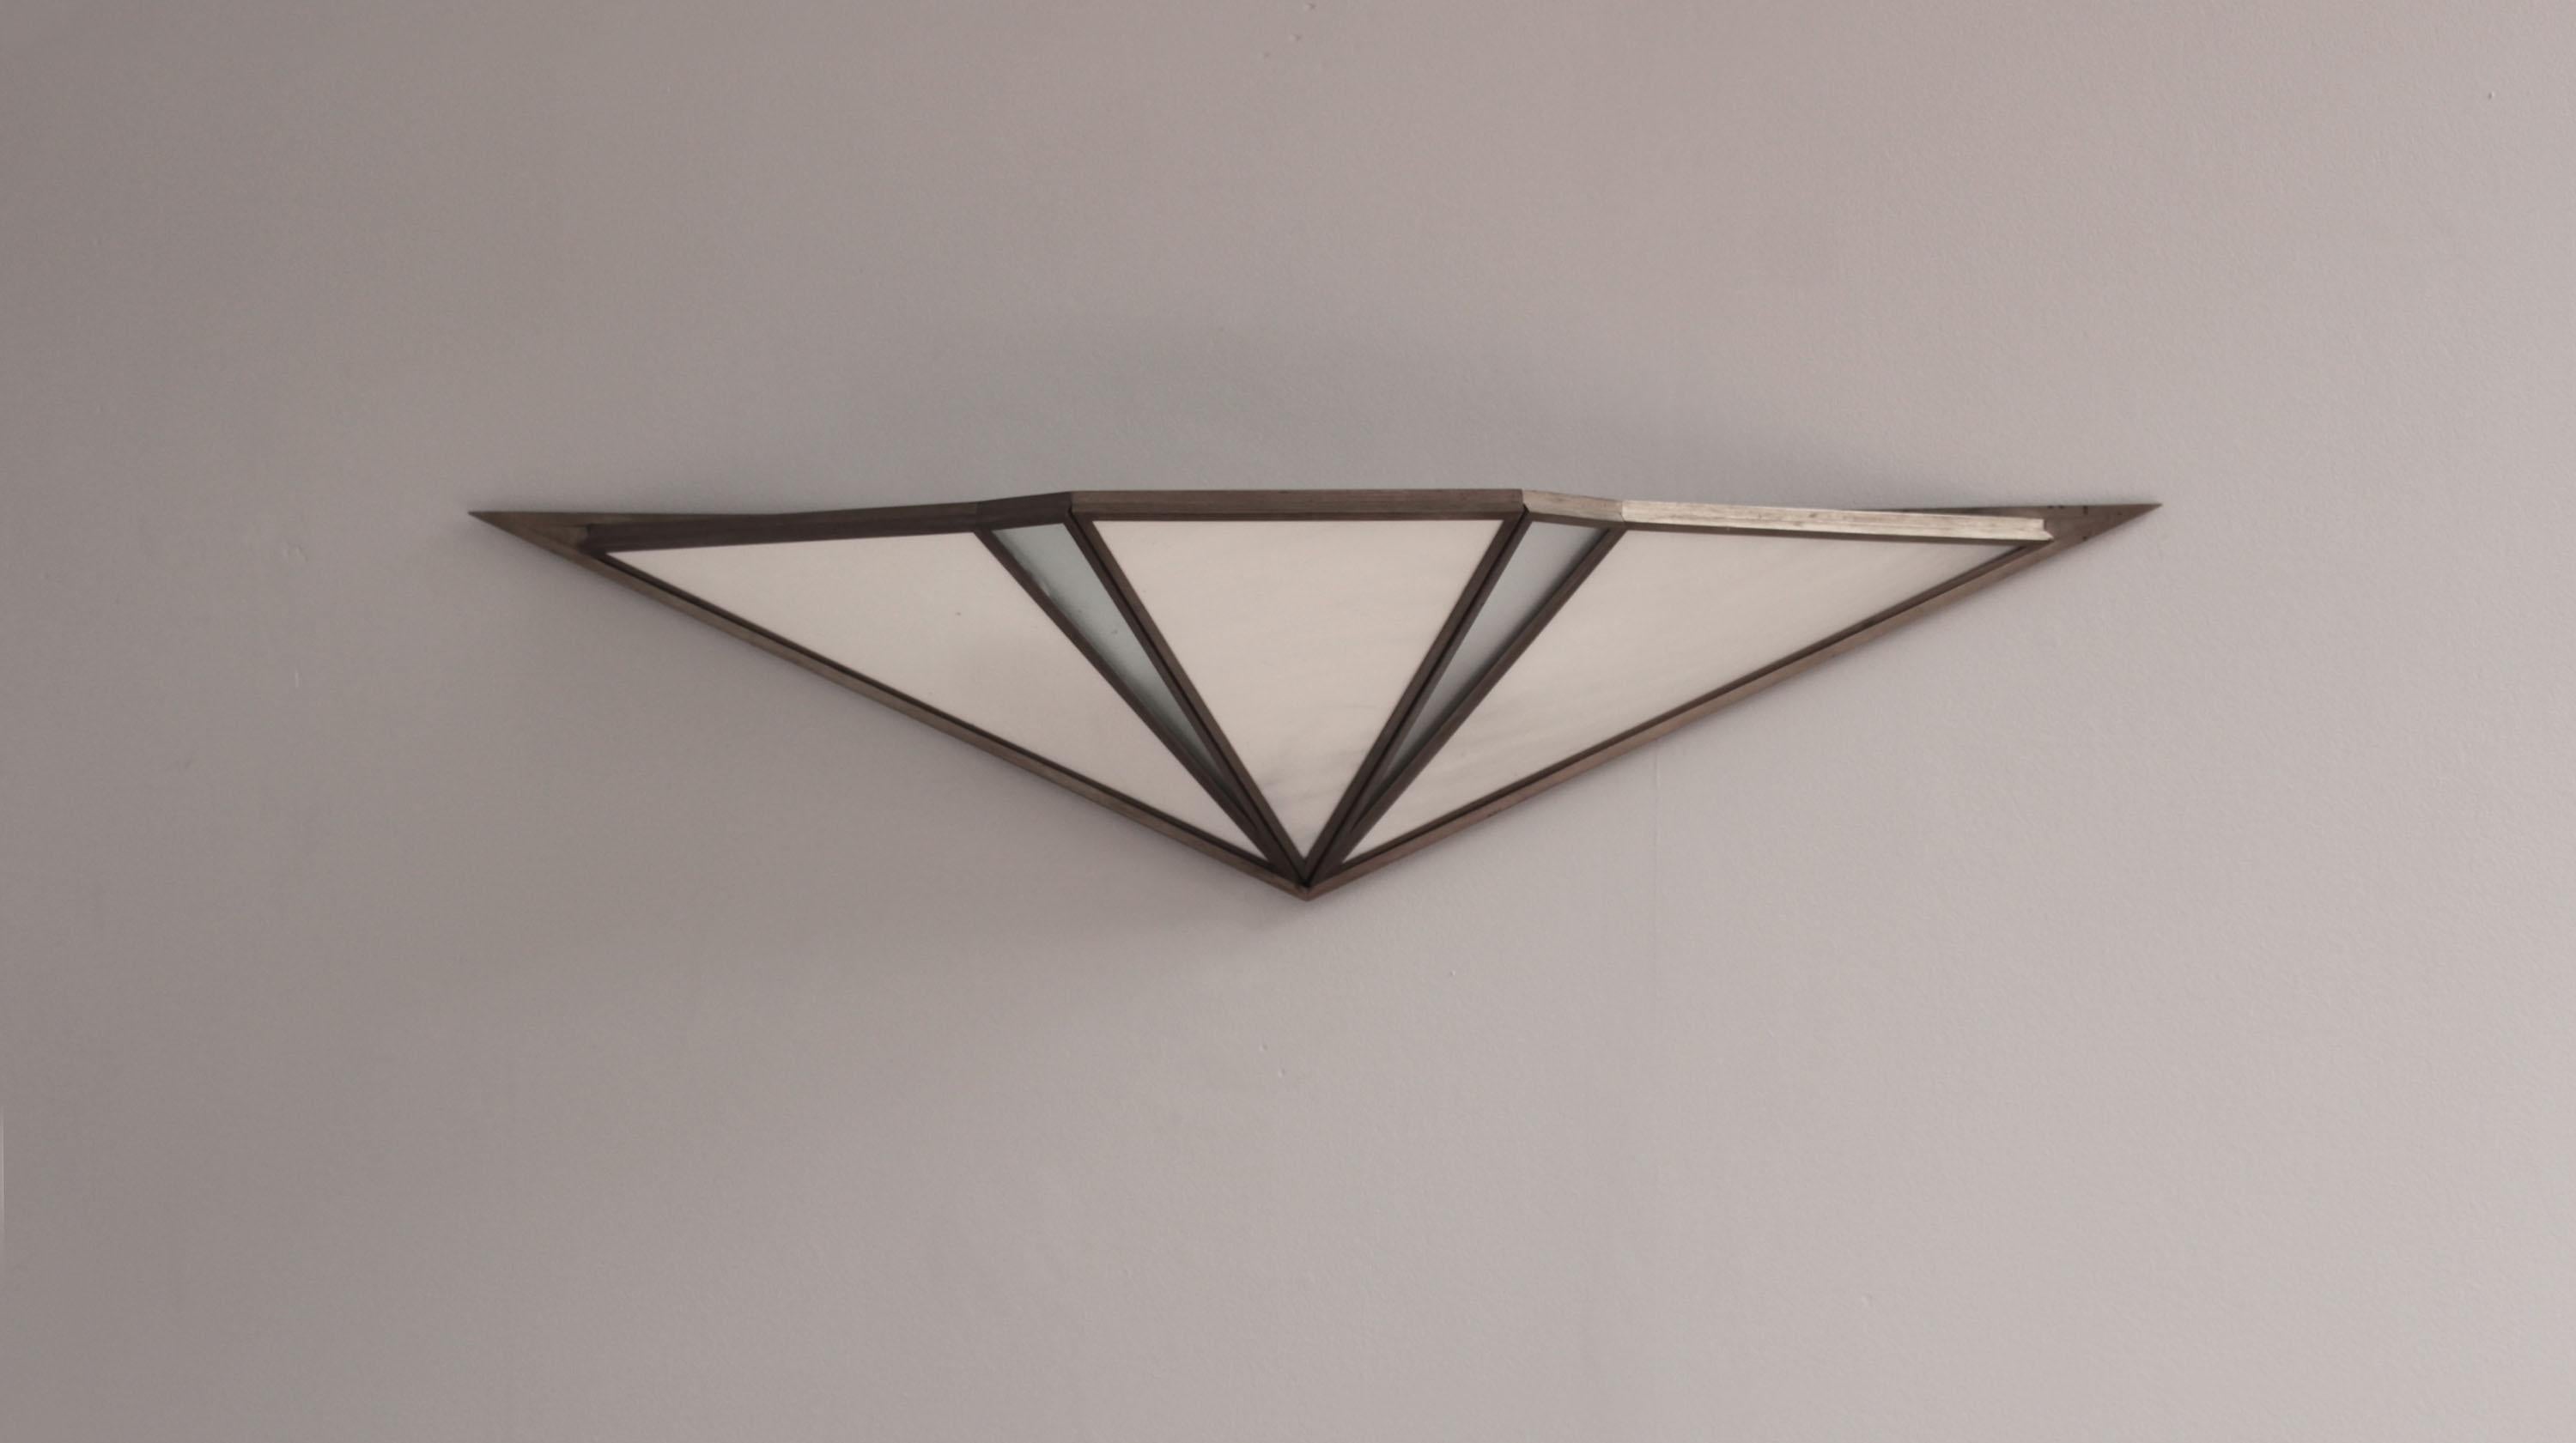 Jean Perzel - A rare fine French Art Deco sconce made with faceted mottled and frosted glass diffusers mounted on a metal frame. Signed.
This is an early work of Jean Perzel using his skill as a master stained-glass maker, looking to combine